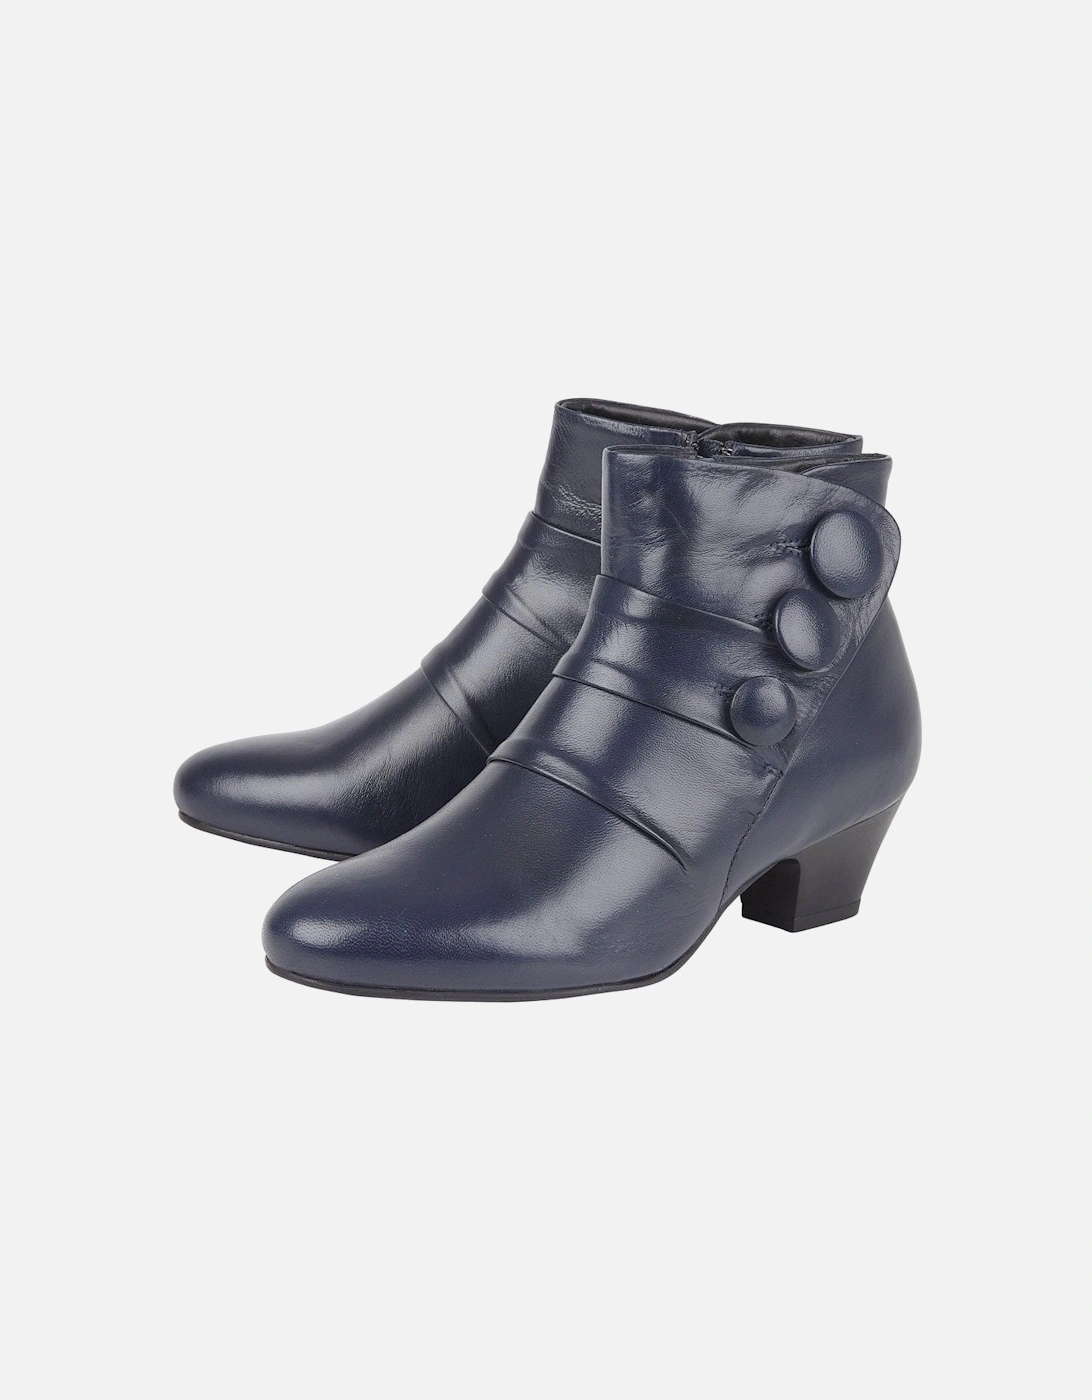 Prancer Womens Ankle Boots